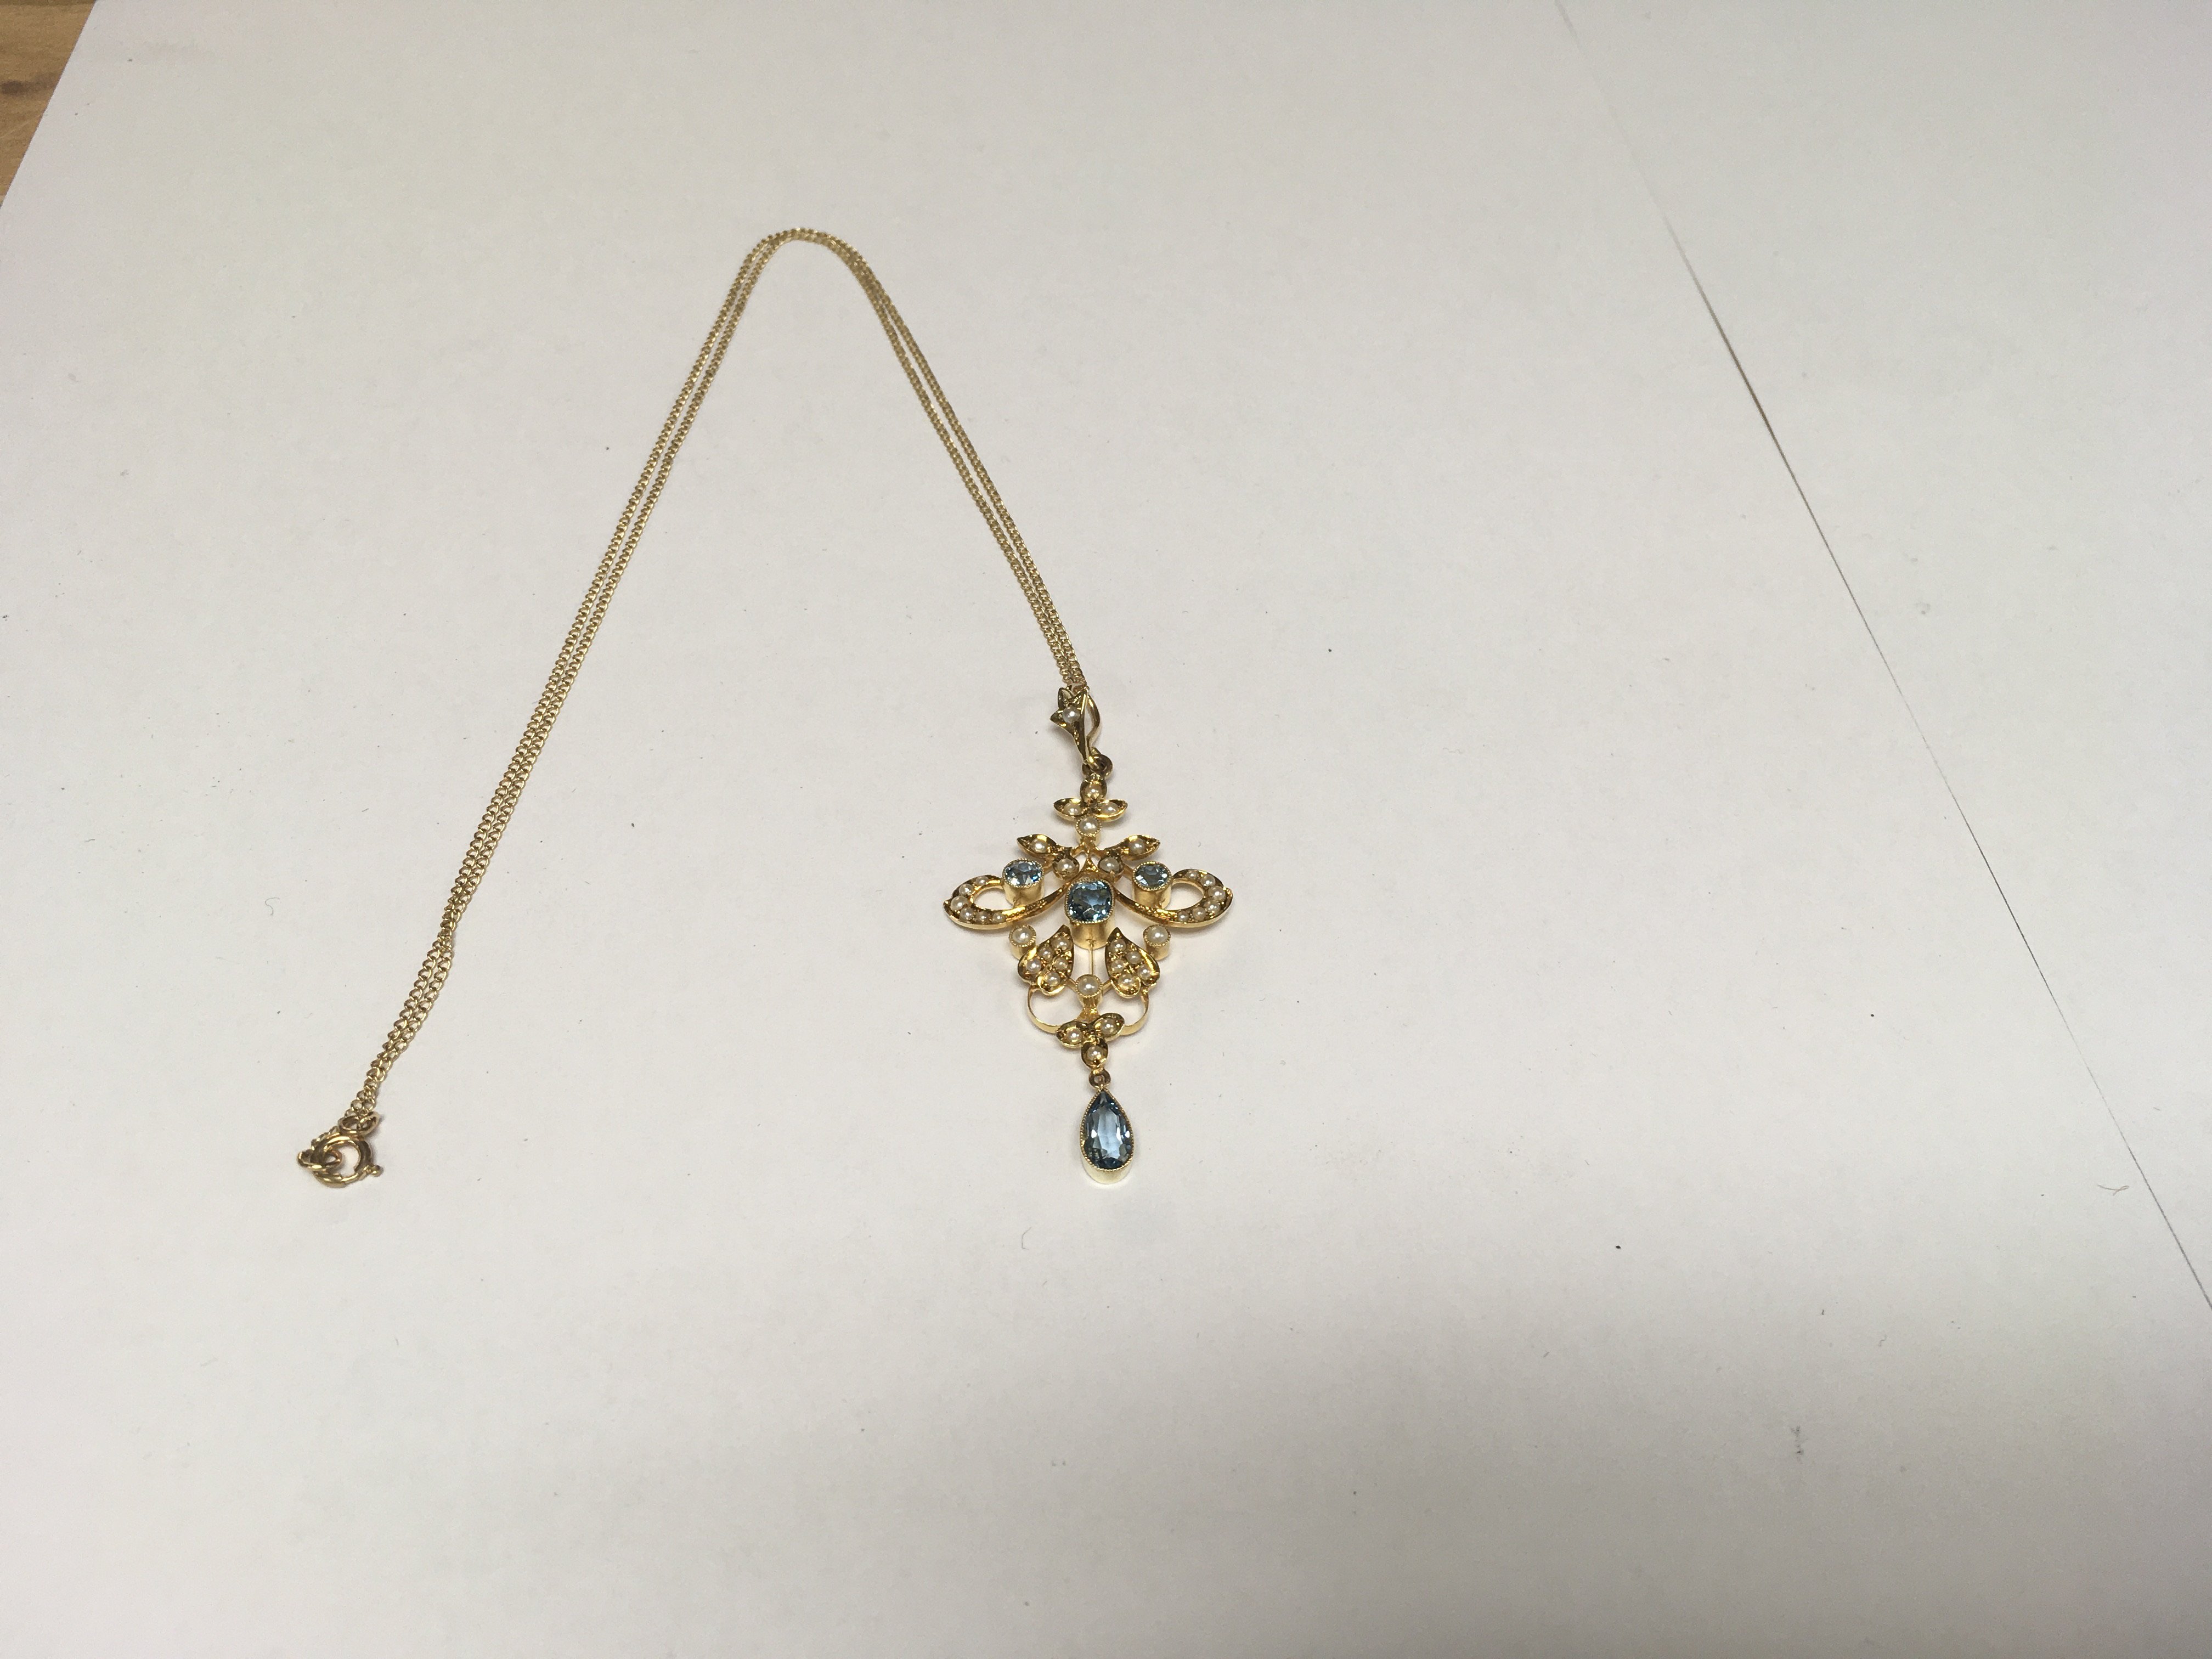 15ct gold pendant on chain. Aquamarine and seed pe - Image 2 of 2